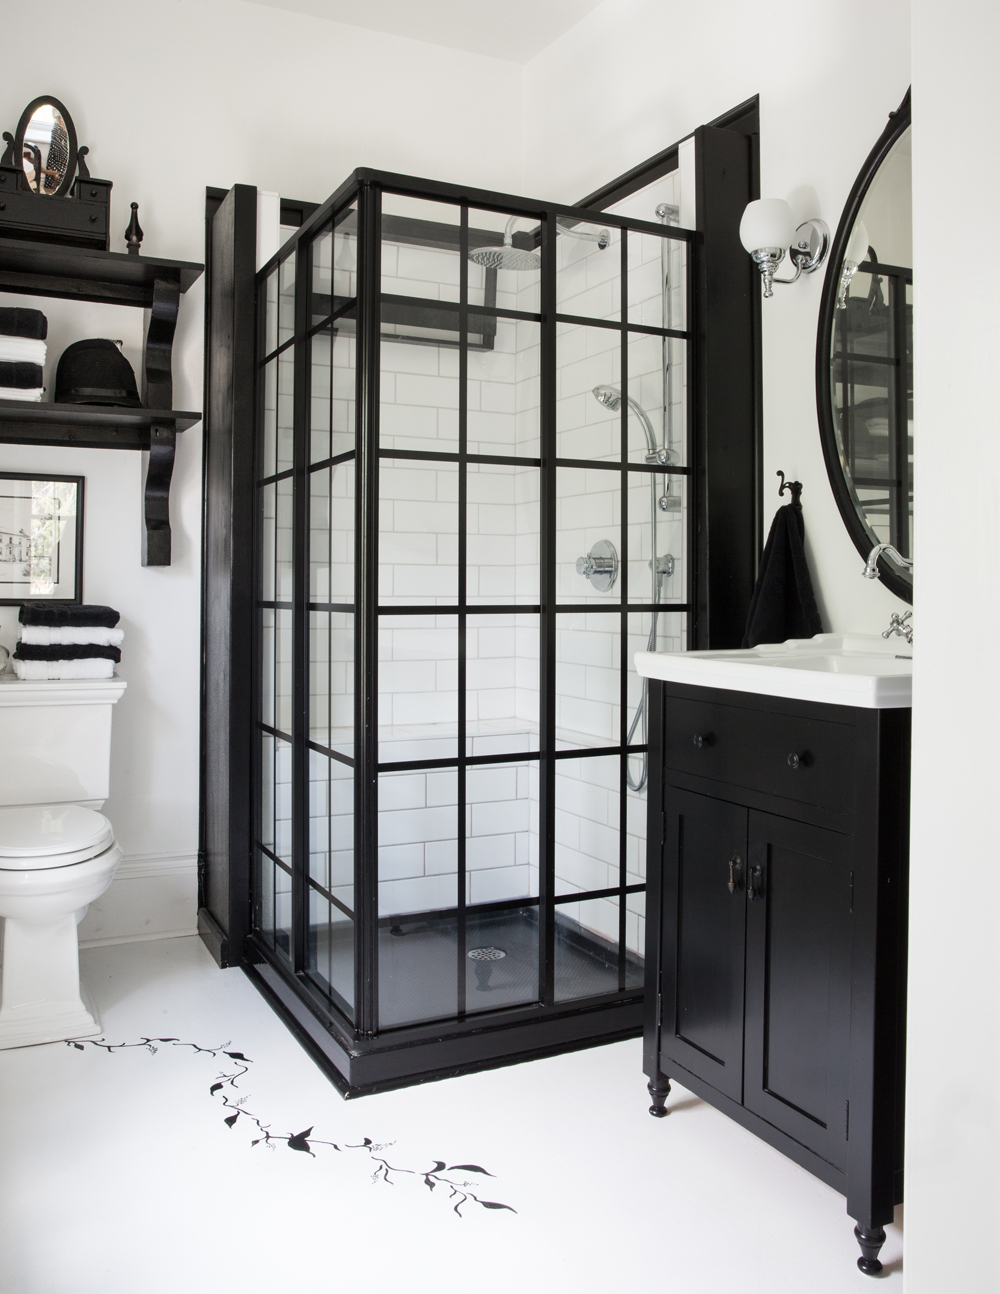 White bathroom with black matte trim and shower